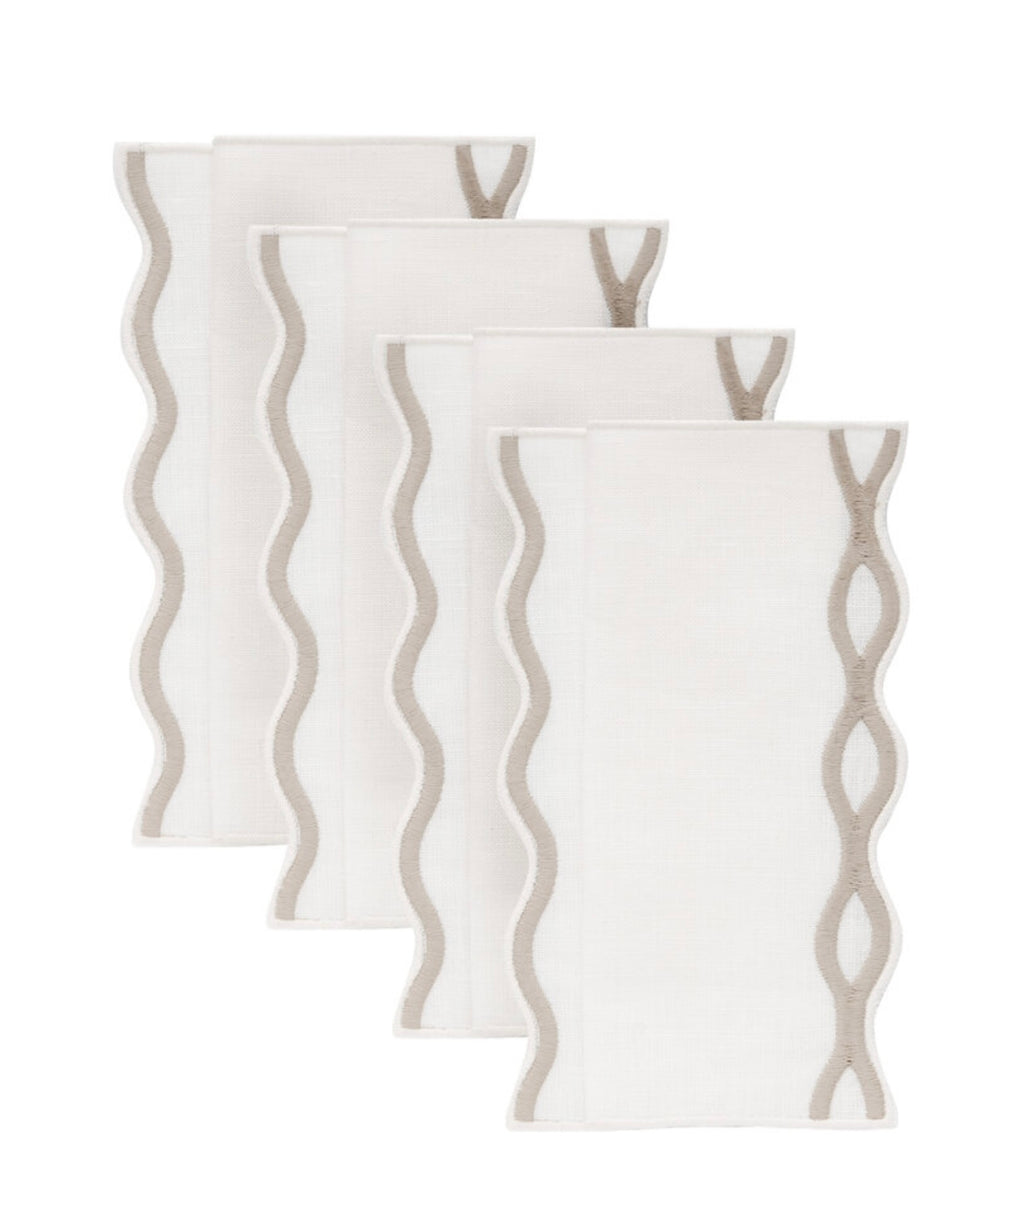 White Linen Cocktail Napkins with Trim in Taupe, Set of 4